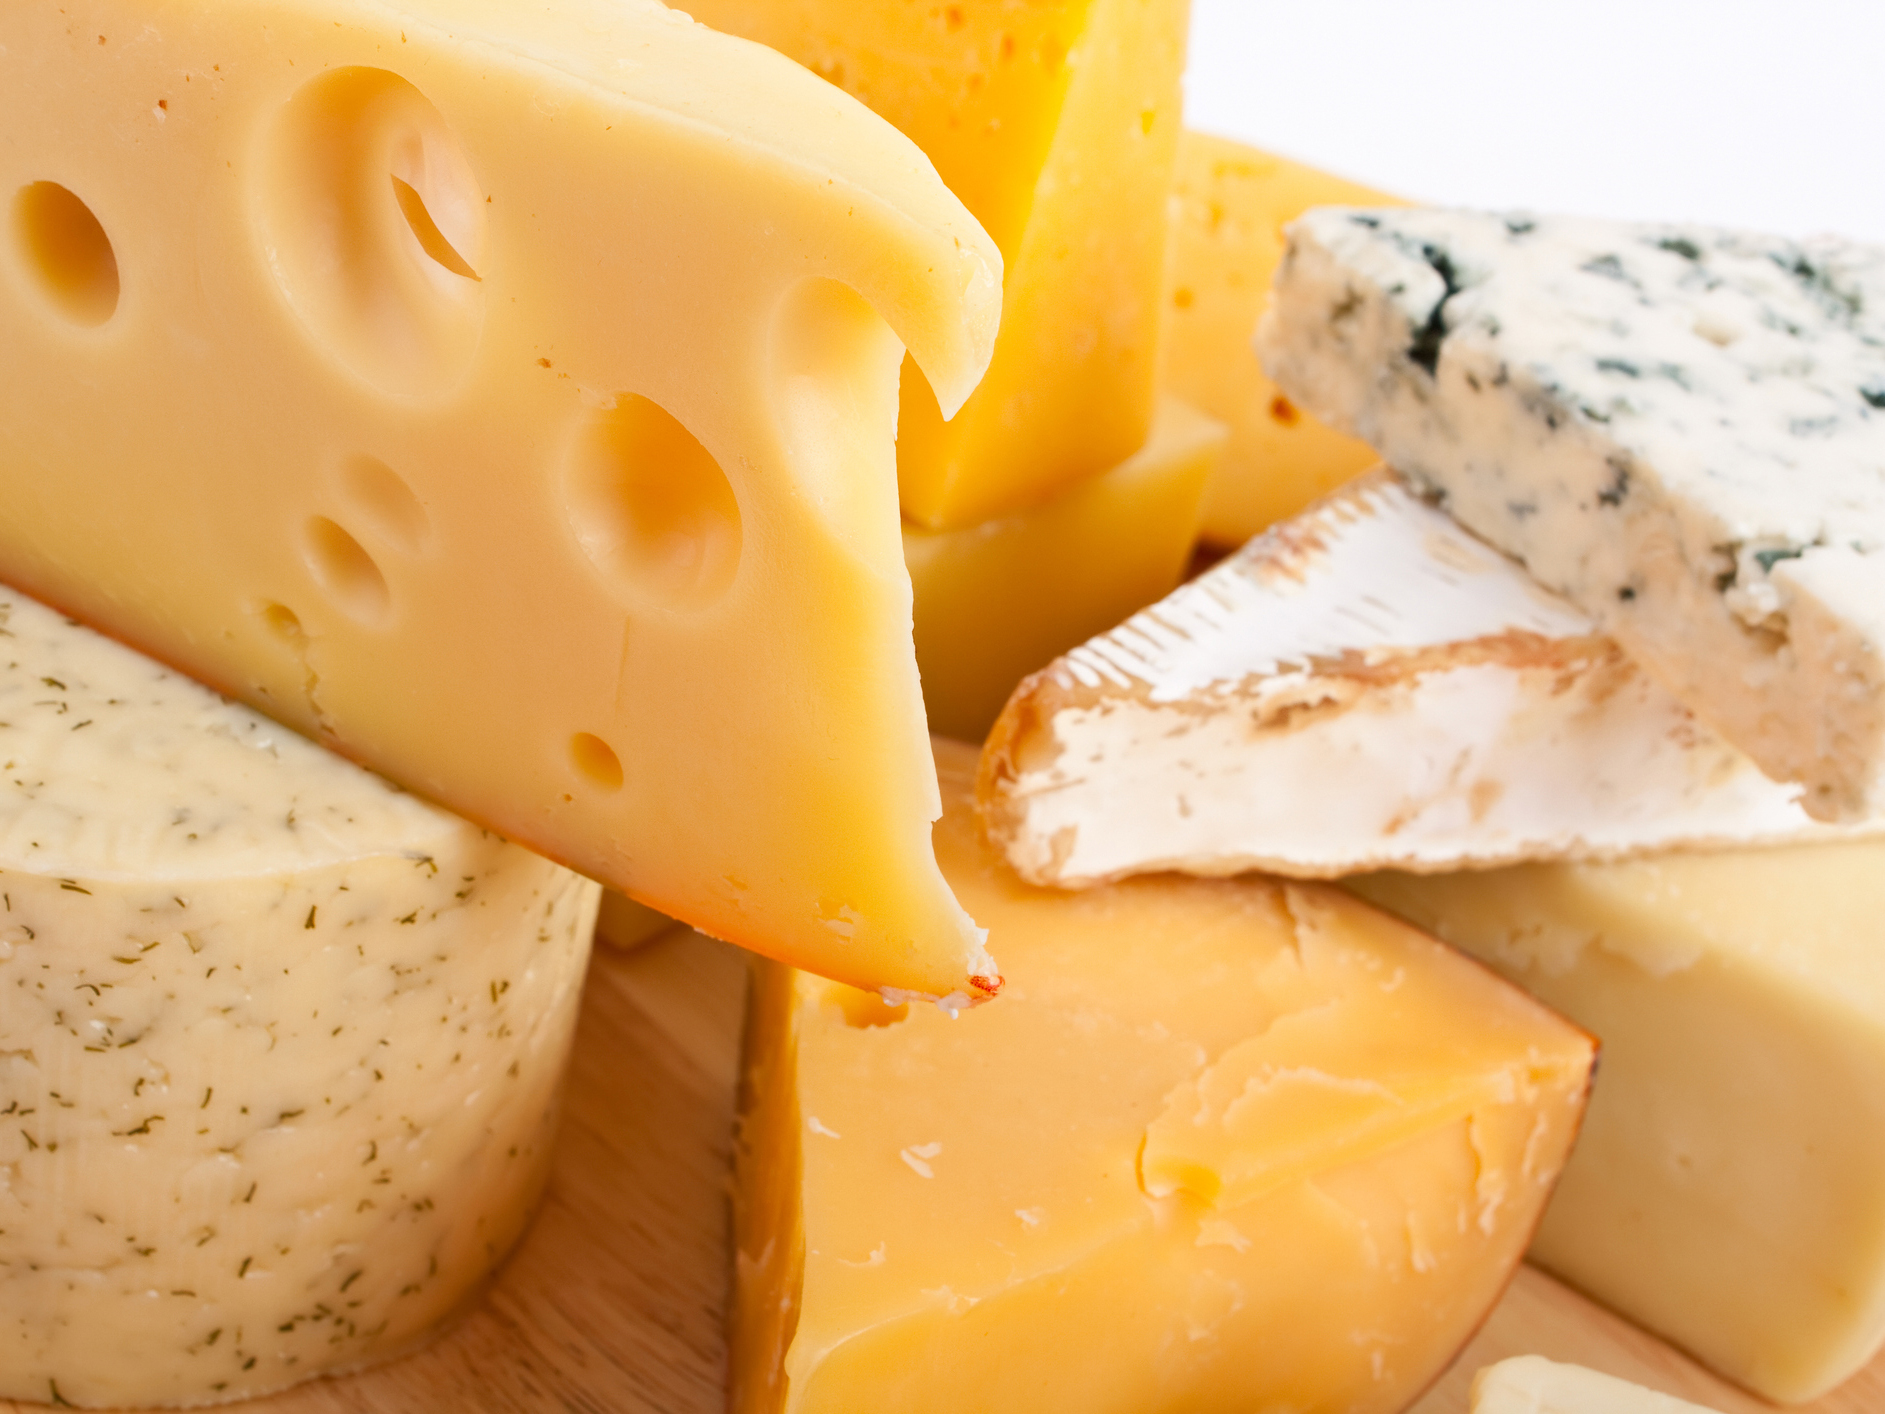 Say yes to cheese for better blood sugar